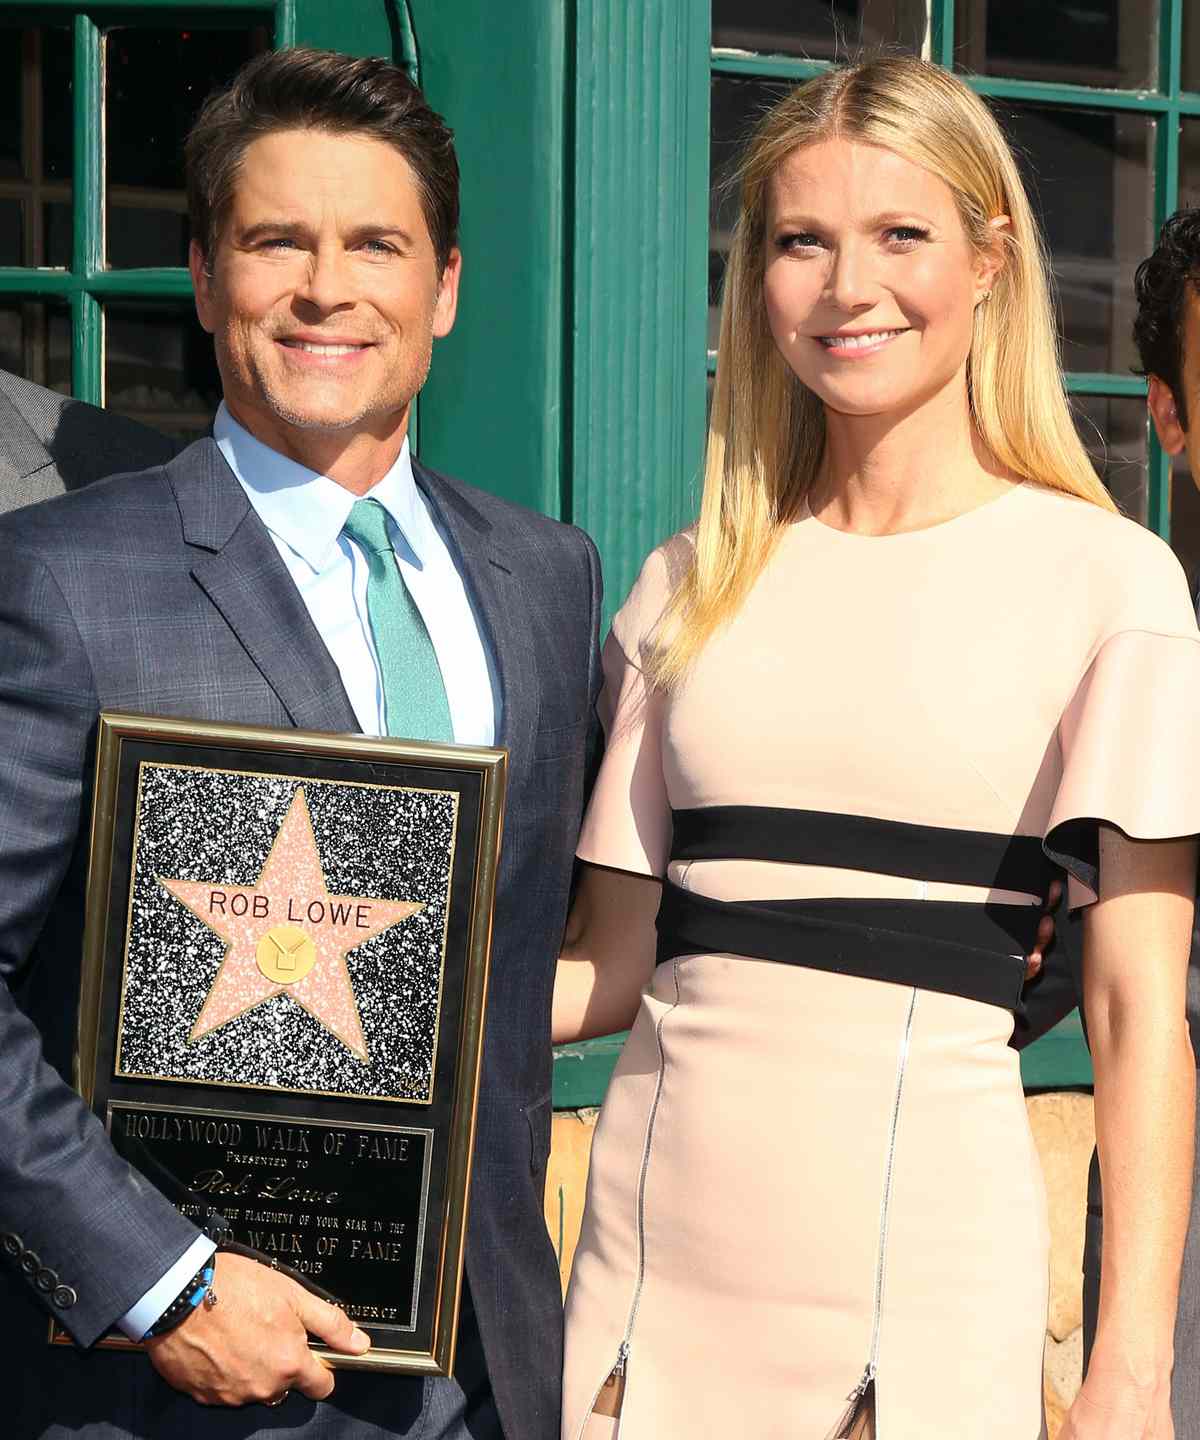 Rob Lowe, Gwyneth Paltrow and Fred Savage attend the ceremony honoring Rob Lowe with a Star on The Hollywood Walk of Fame held on December 8, 2015 in Hollywood, California.